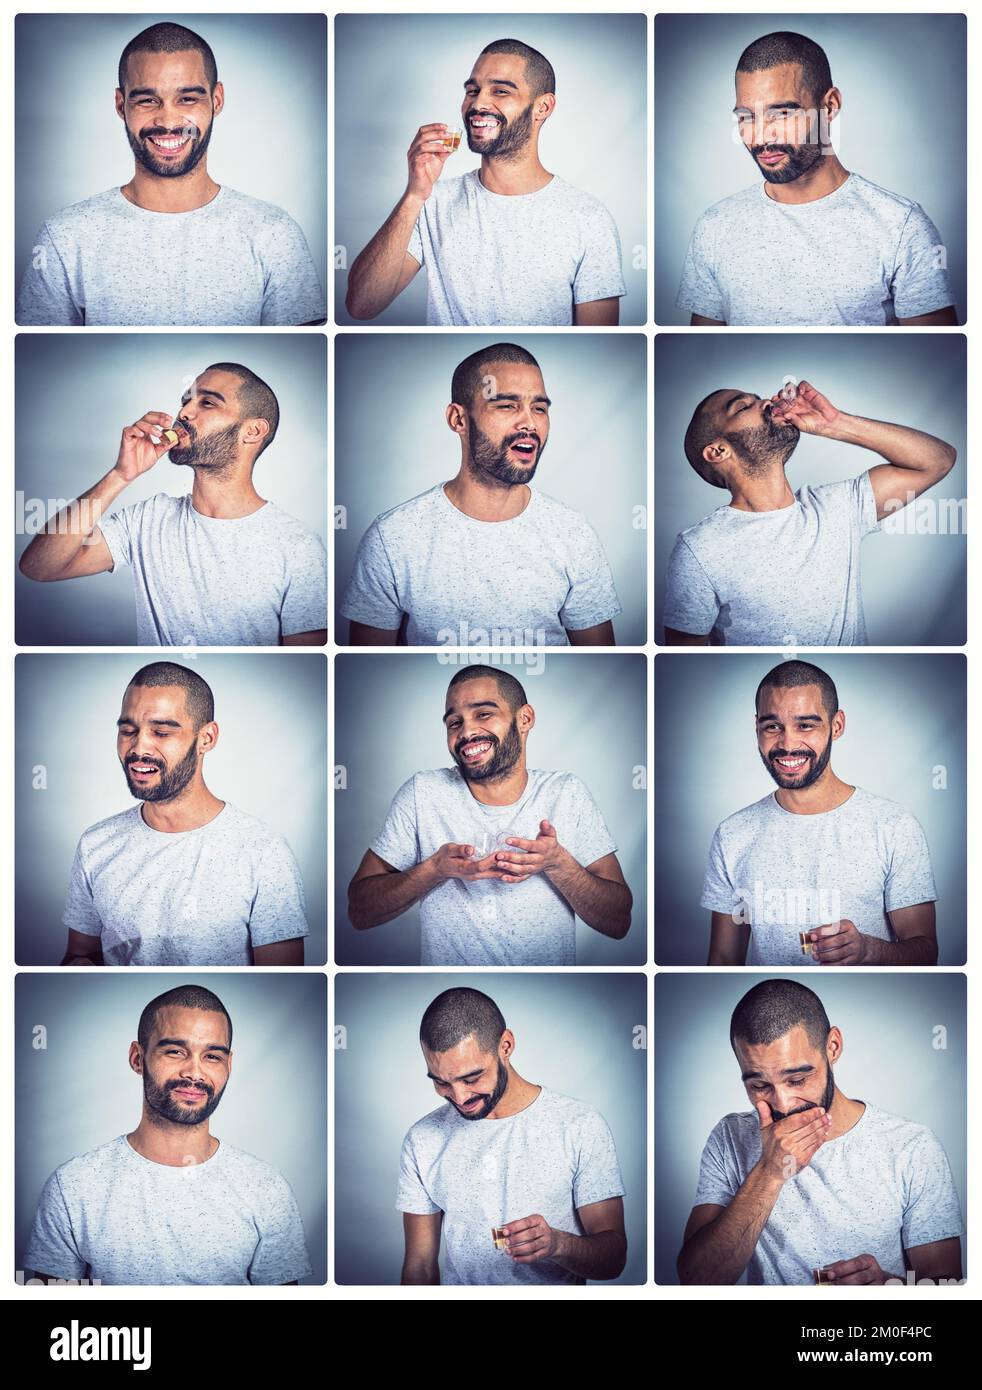 Collage, drunk man and drinking alcohol at party for new years, birthday or Christmas celebration with funny photobooth portrait. Funny male with Stock Photo